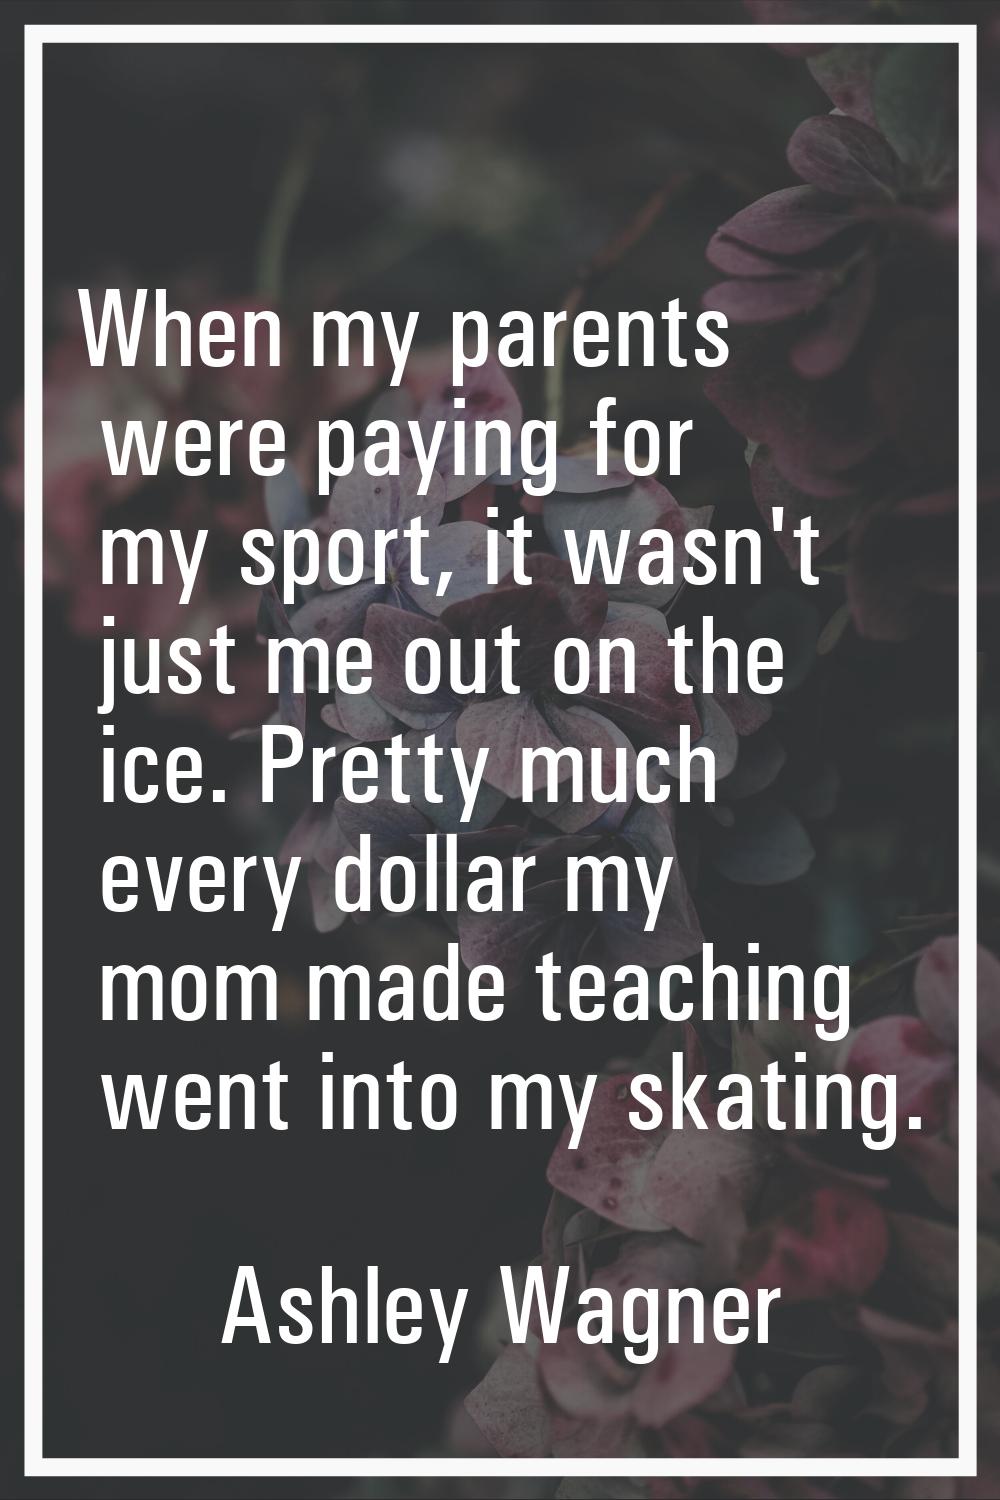 When my parents were paying for my sport, it wasn't just me out on the ice. Pretty much every dolla